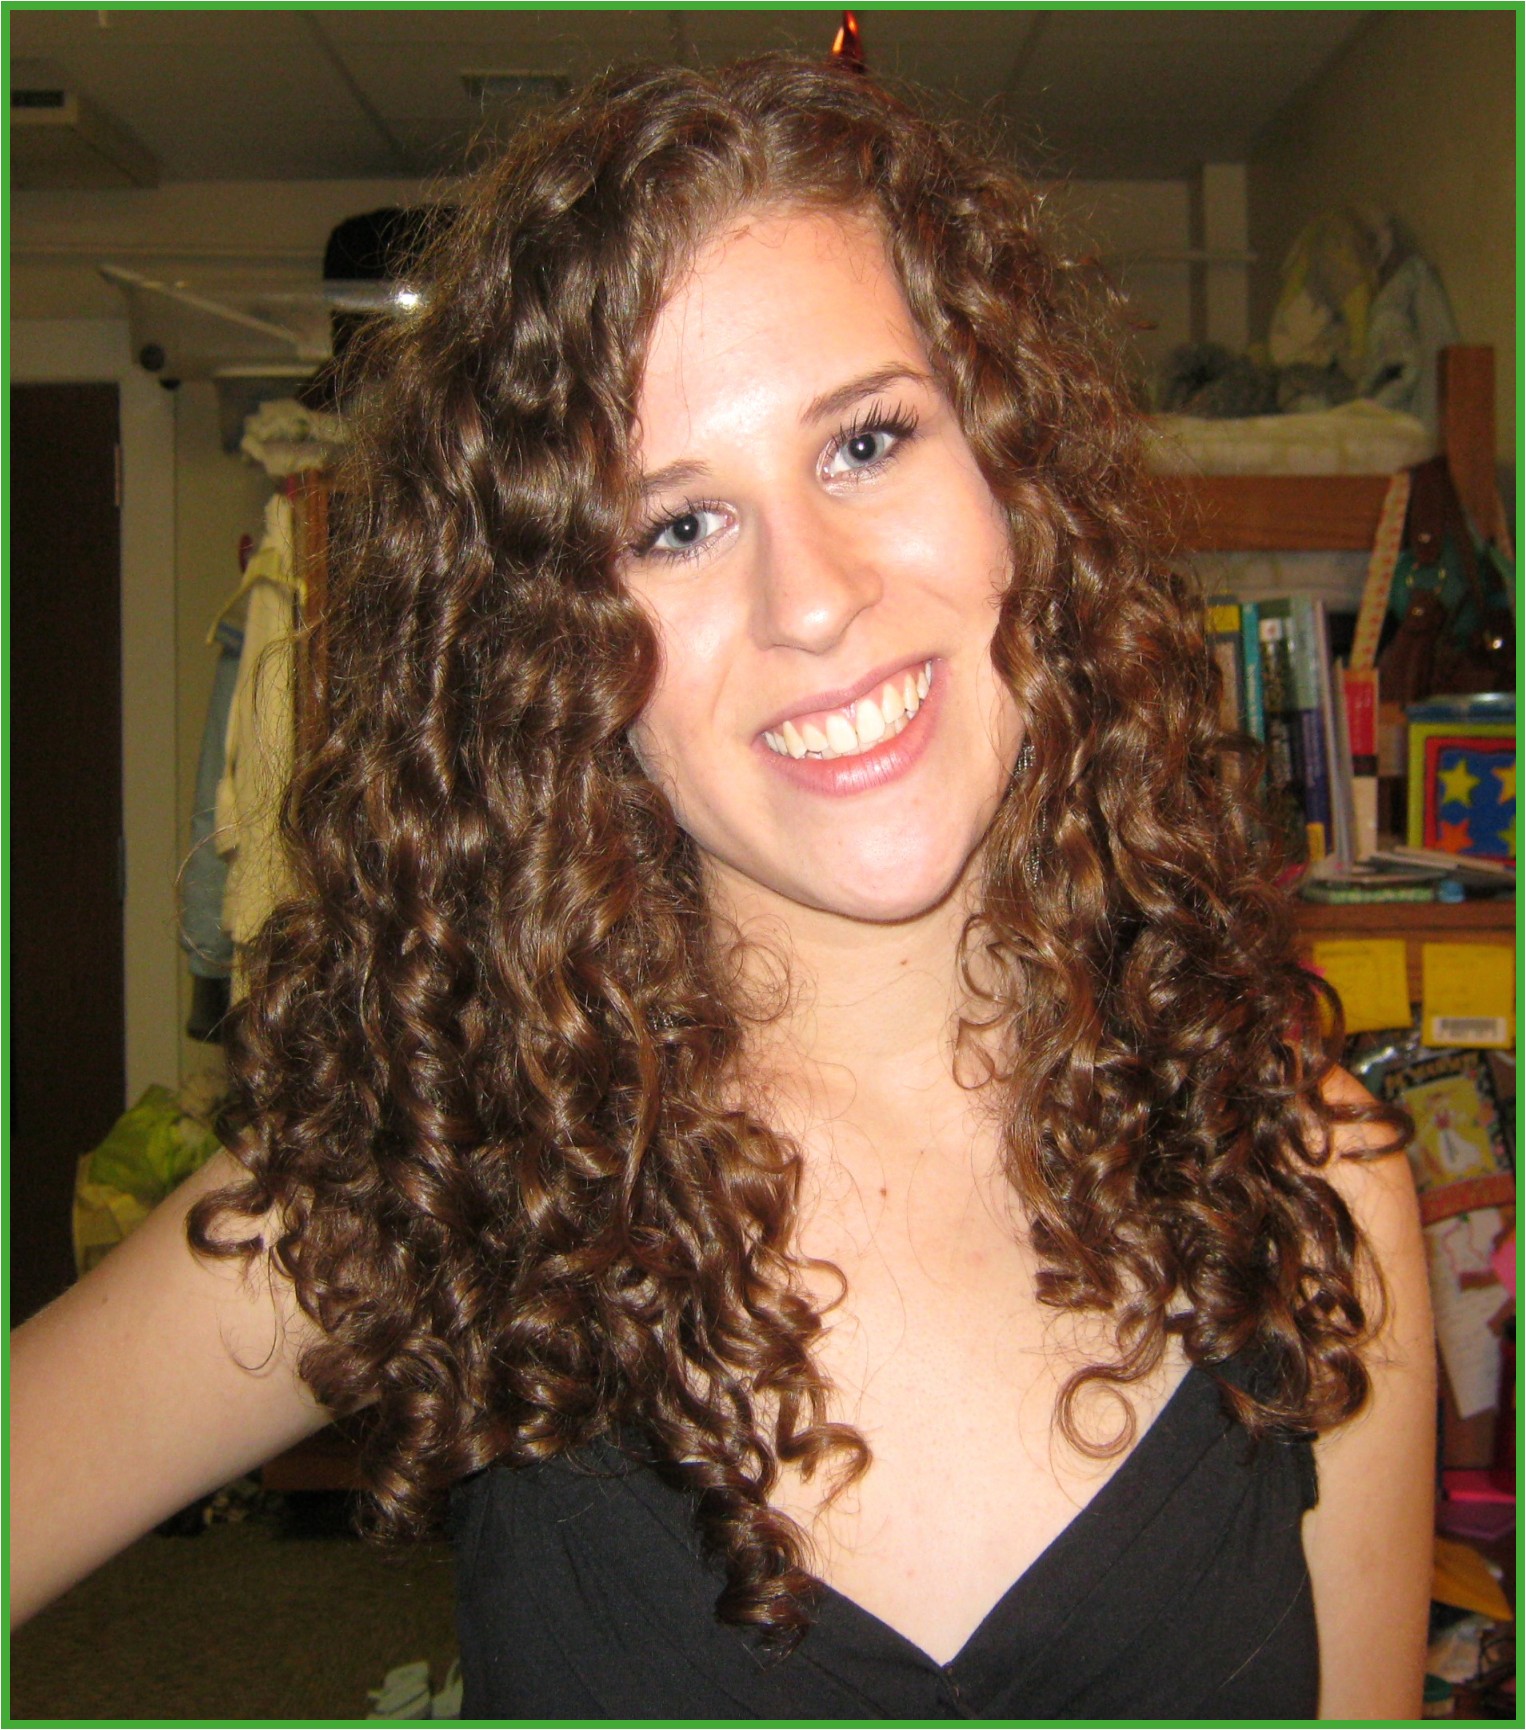 Short Dark Curly Hairstyles Exciting Very Curly Hairstyles Fresh Curly Hair 0d Archives Hair